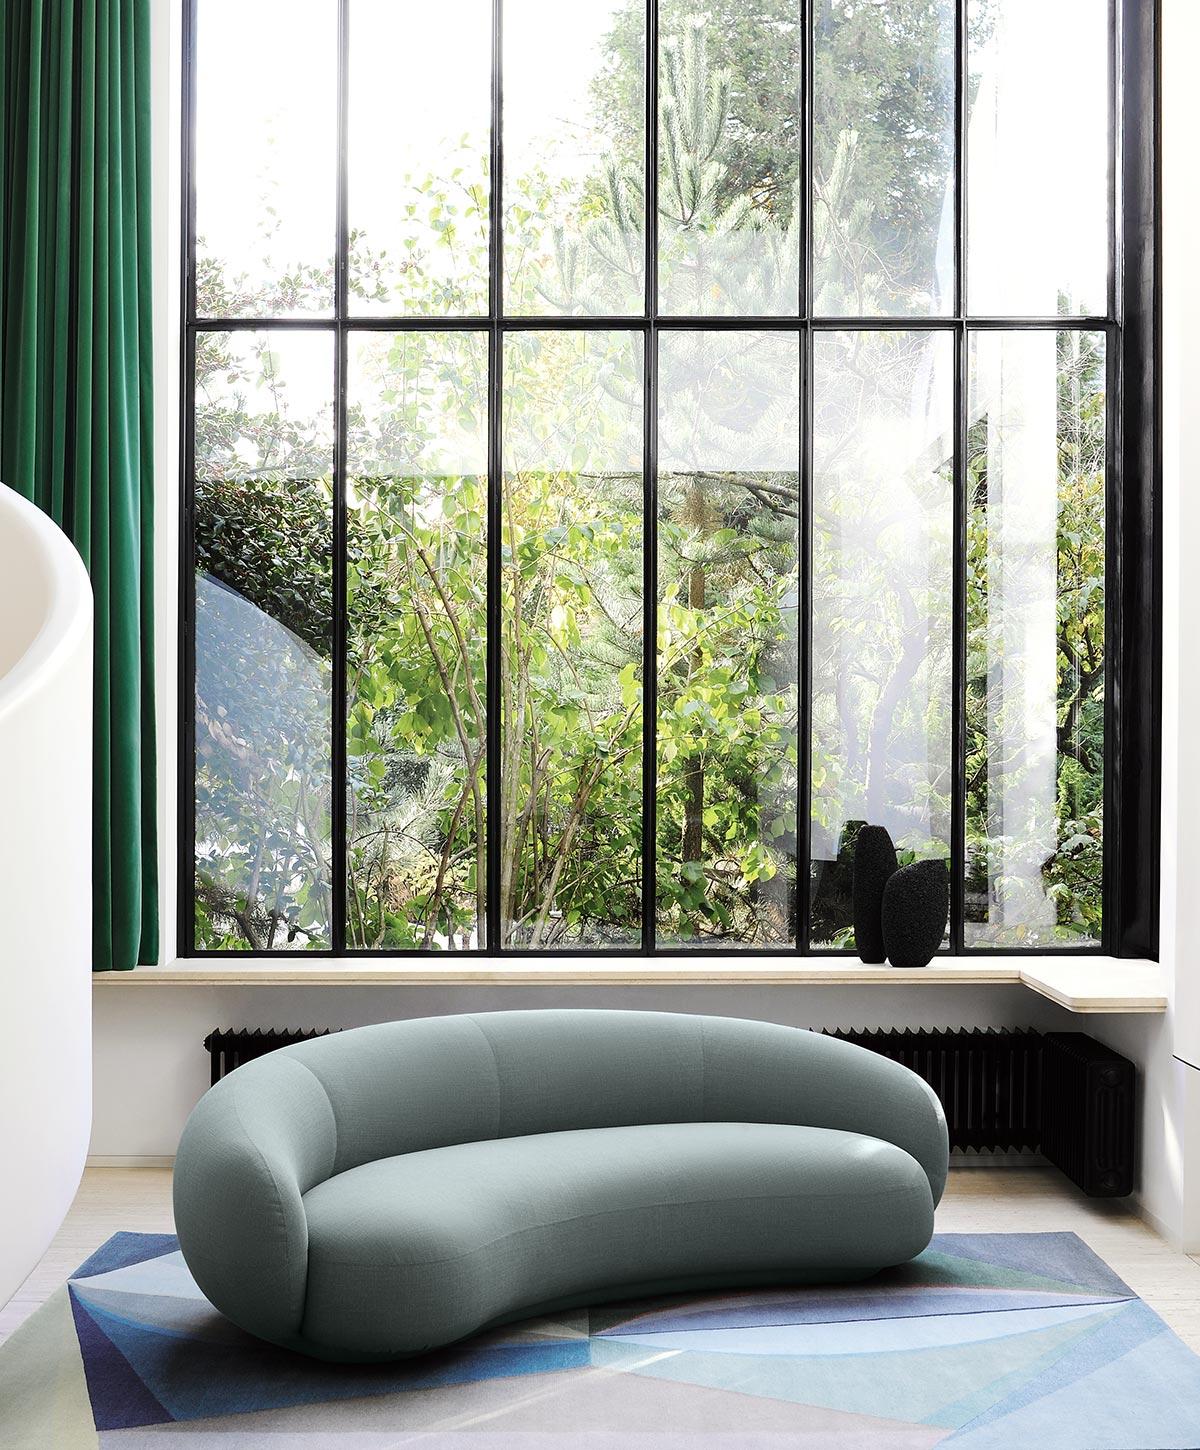 Designer: Jonas Wagell

Julep is influenced by the 1950s Avant-Garde movement, drawing upon its simplicity and grandeur, refined by a contemporary, romantic, feminine allure. Star of the series is the sofa, whose generous rounded lines provided